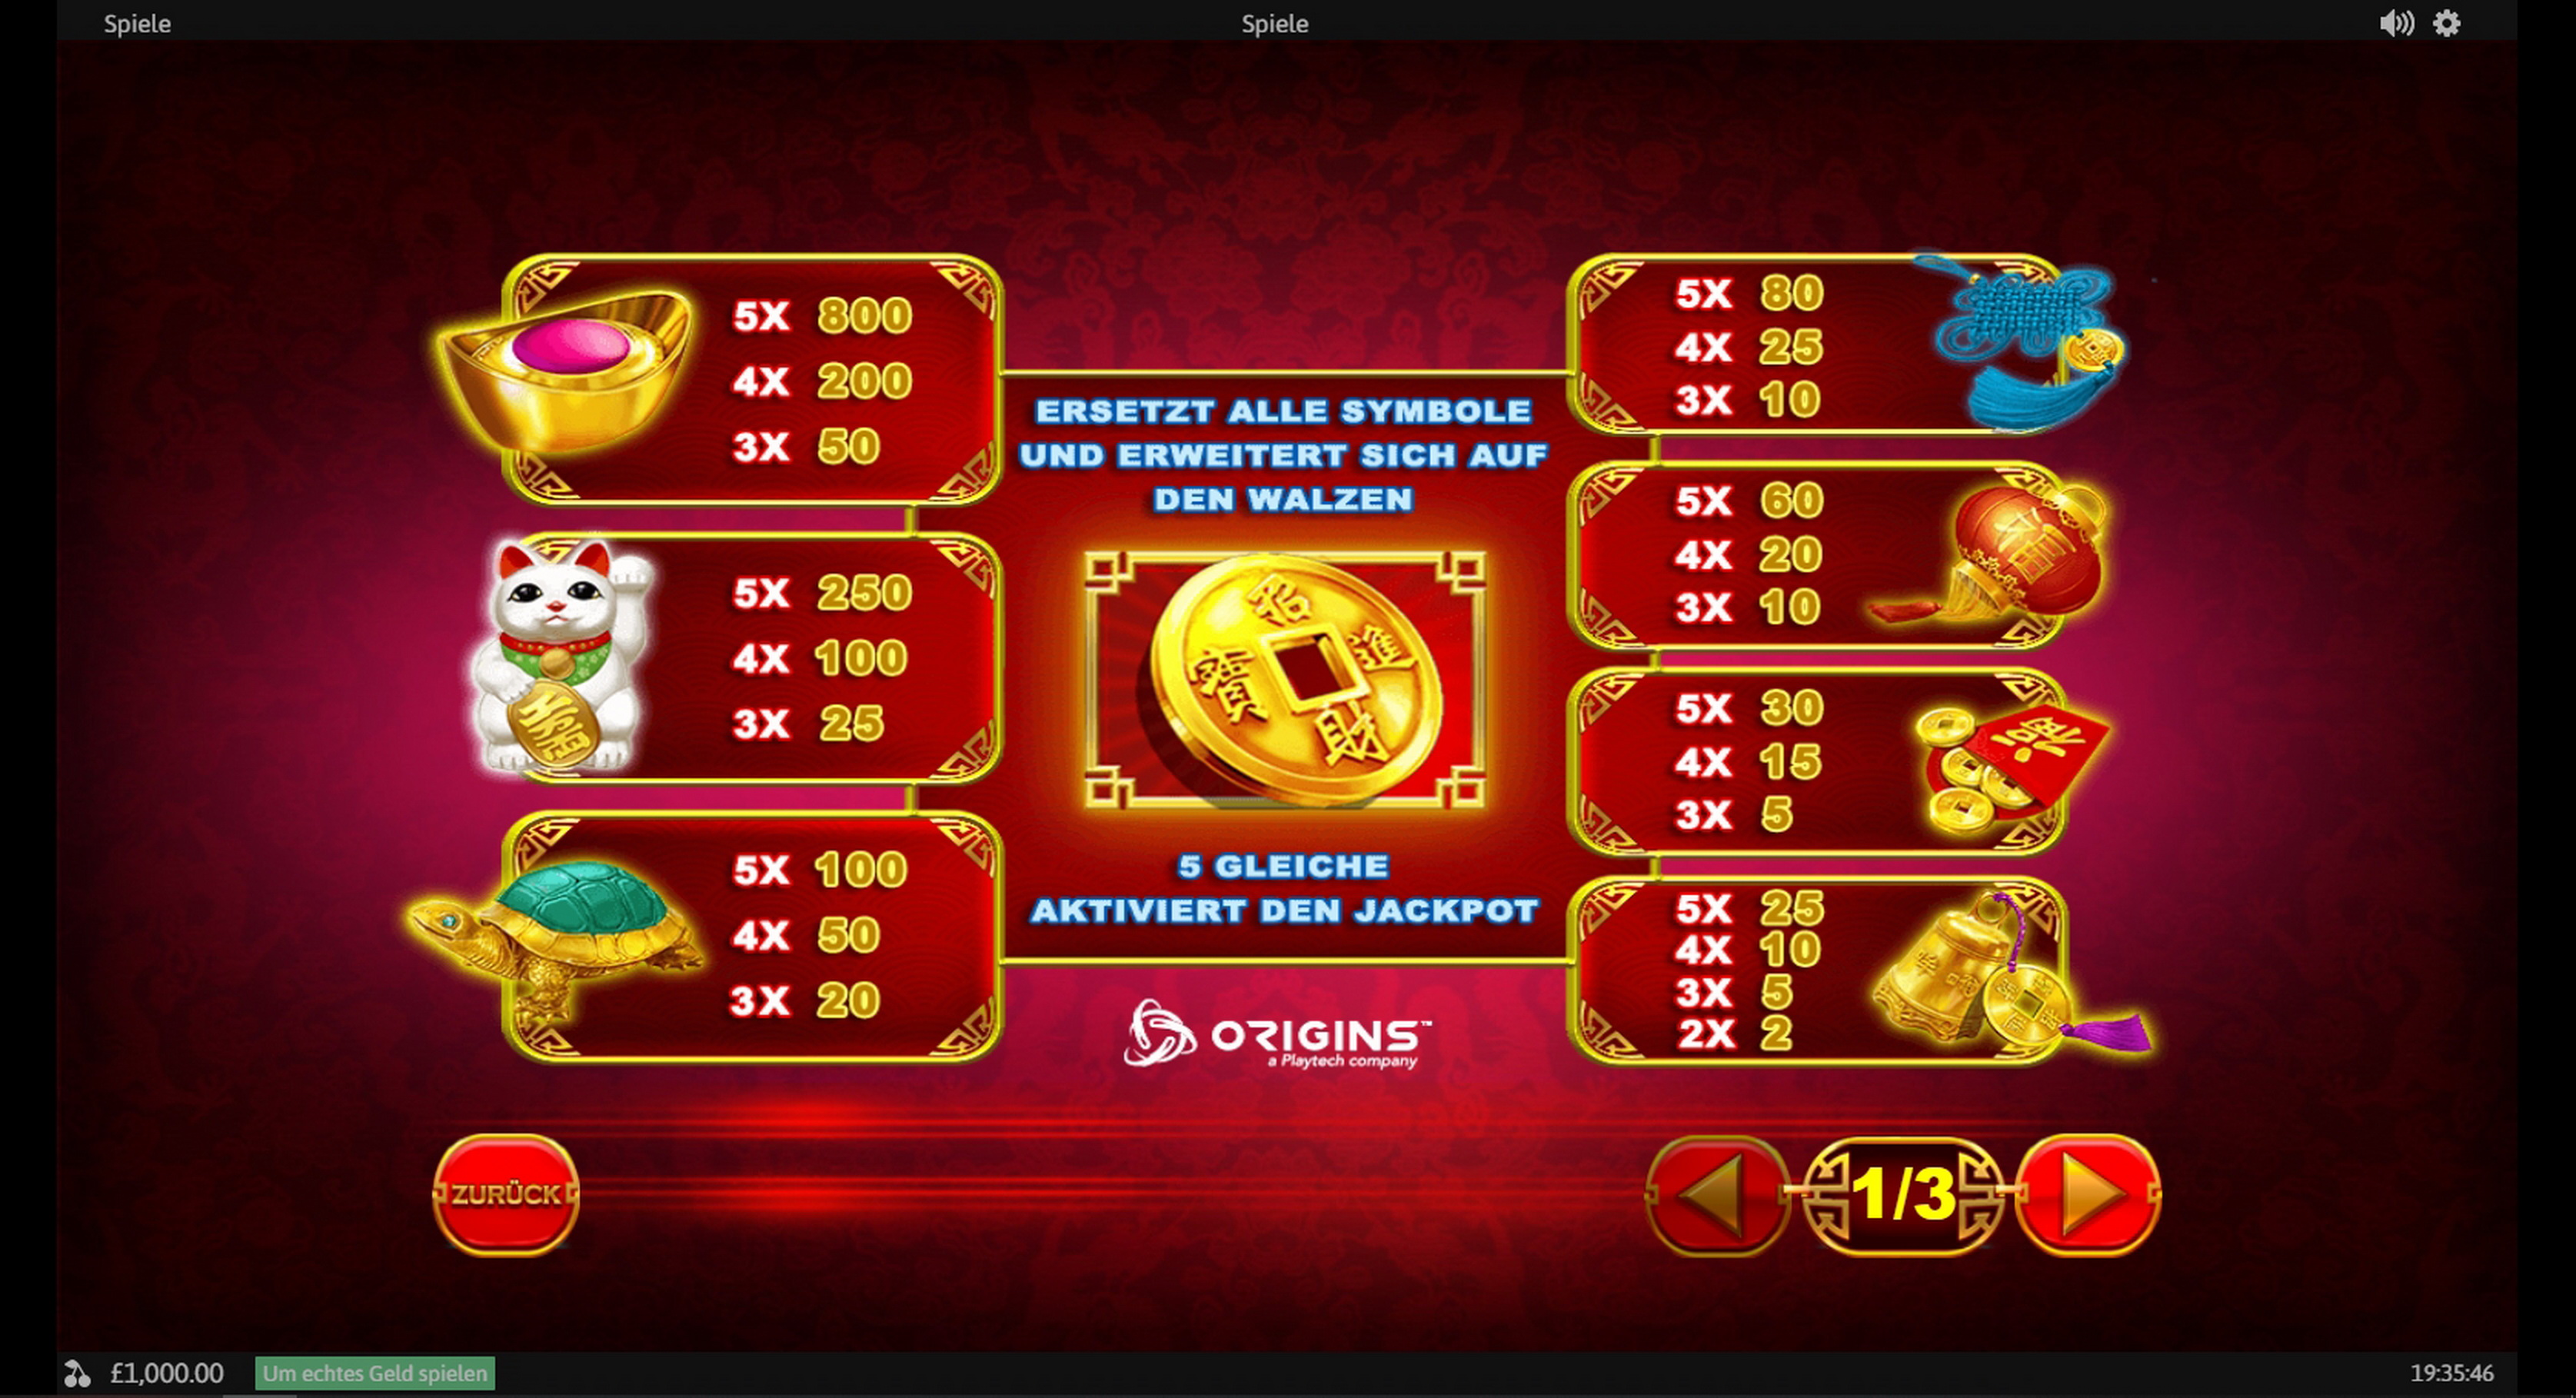 Info of Coin! Coin! Coin! Slot Game by Playtech